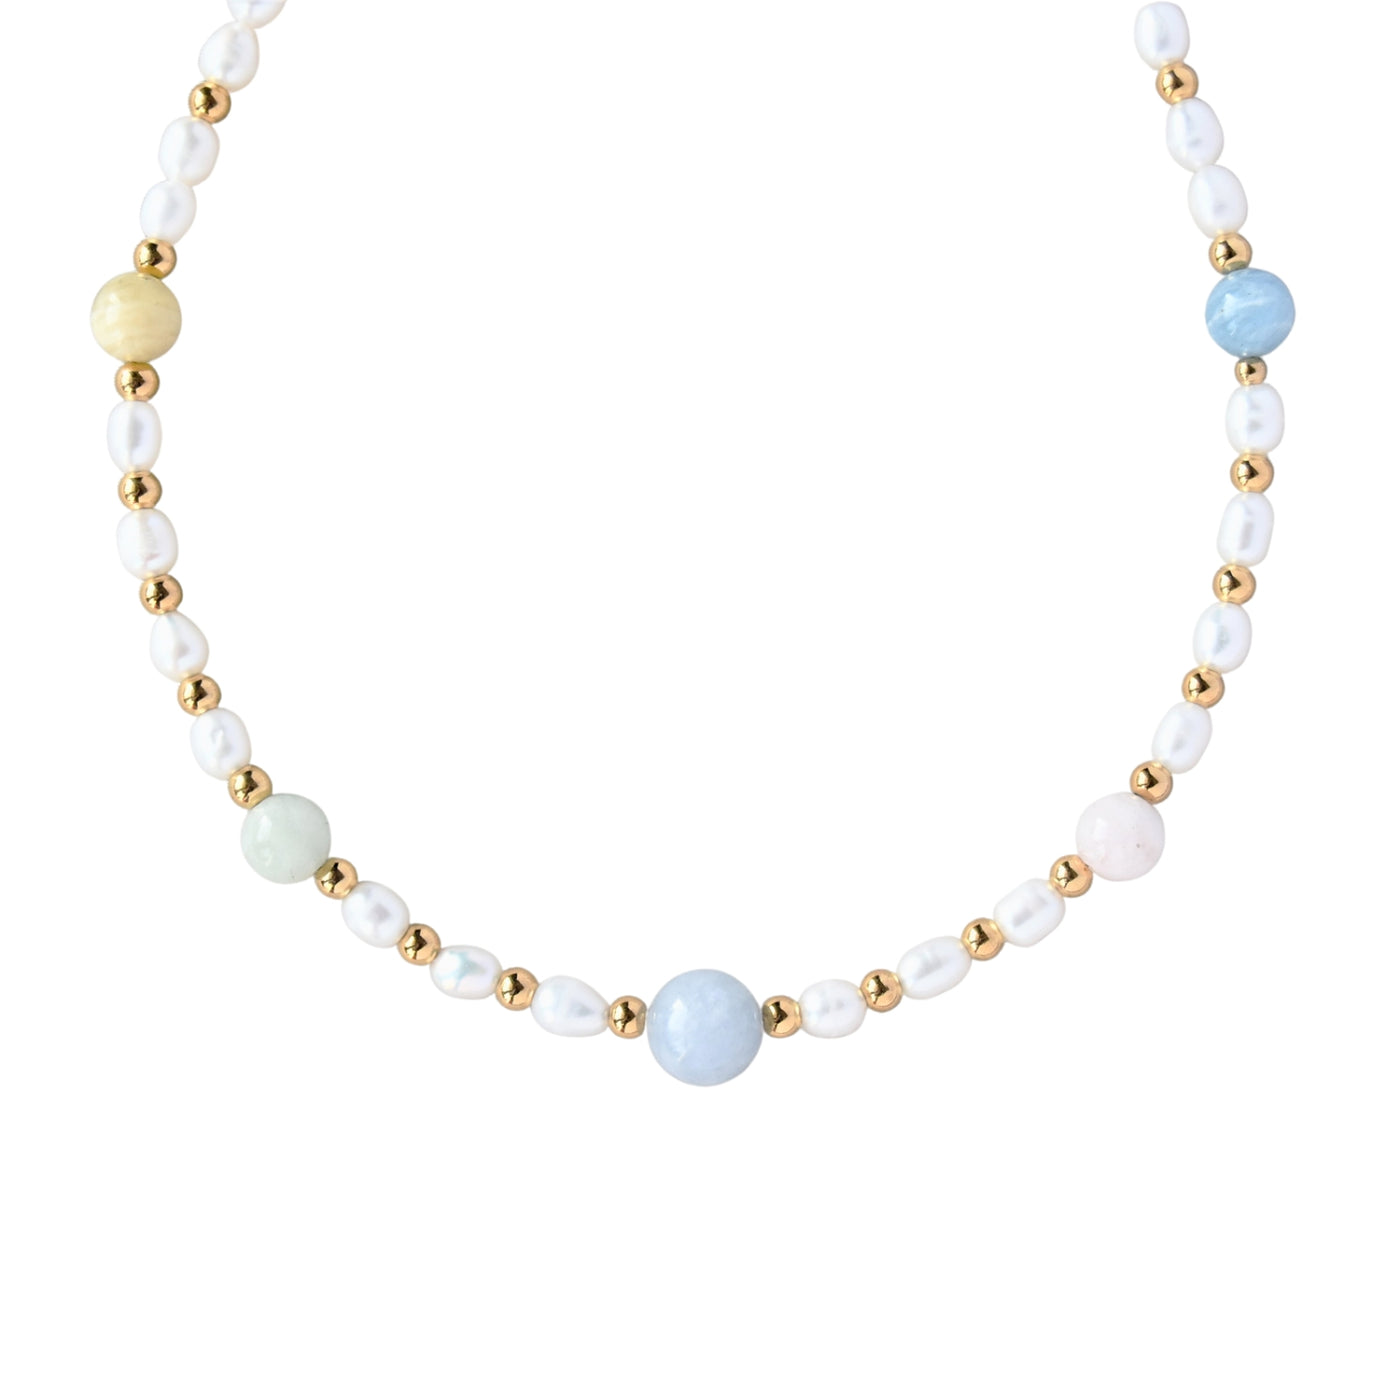 Freshwater pearls and beryl necklace